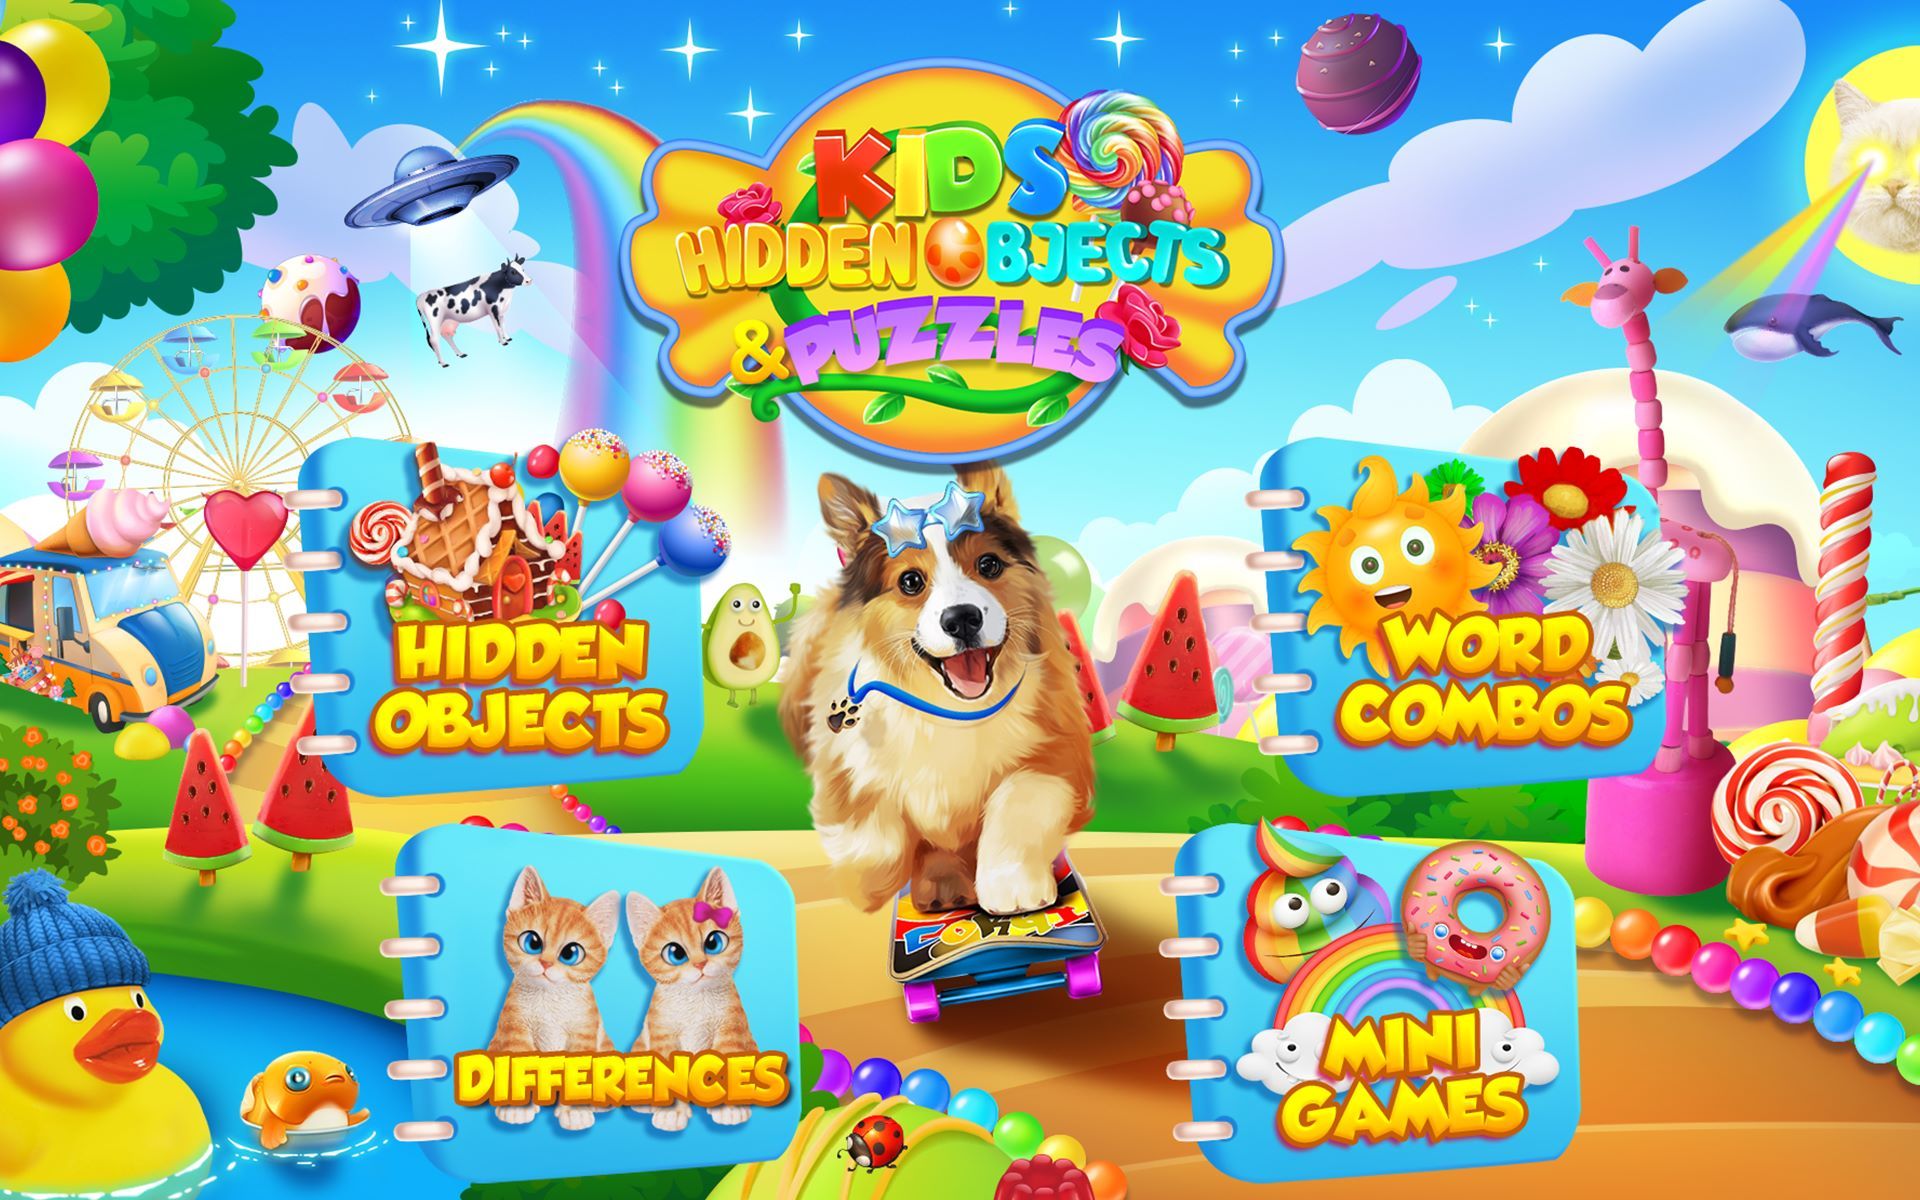 Kids Learning Puzzle Pic Game - Fun Educational Hidden Objects Games